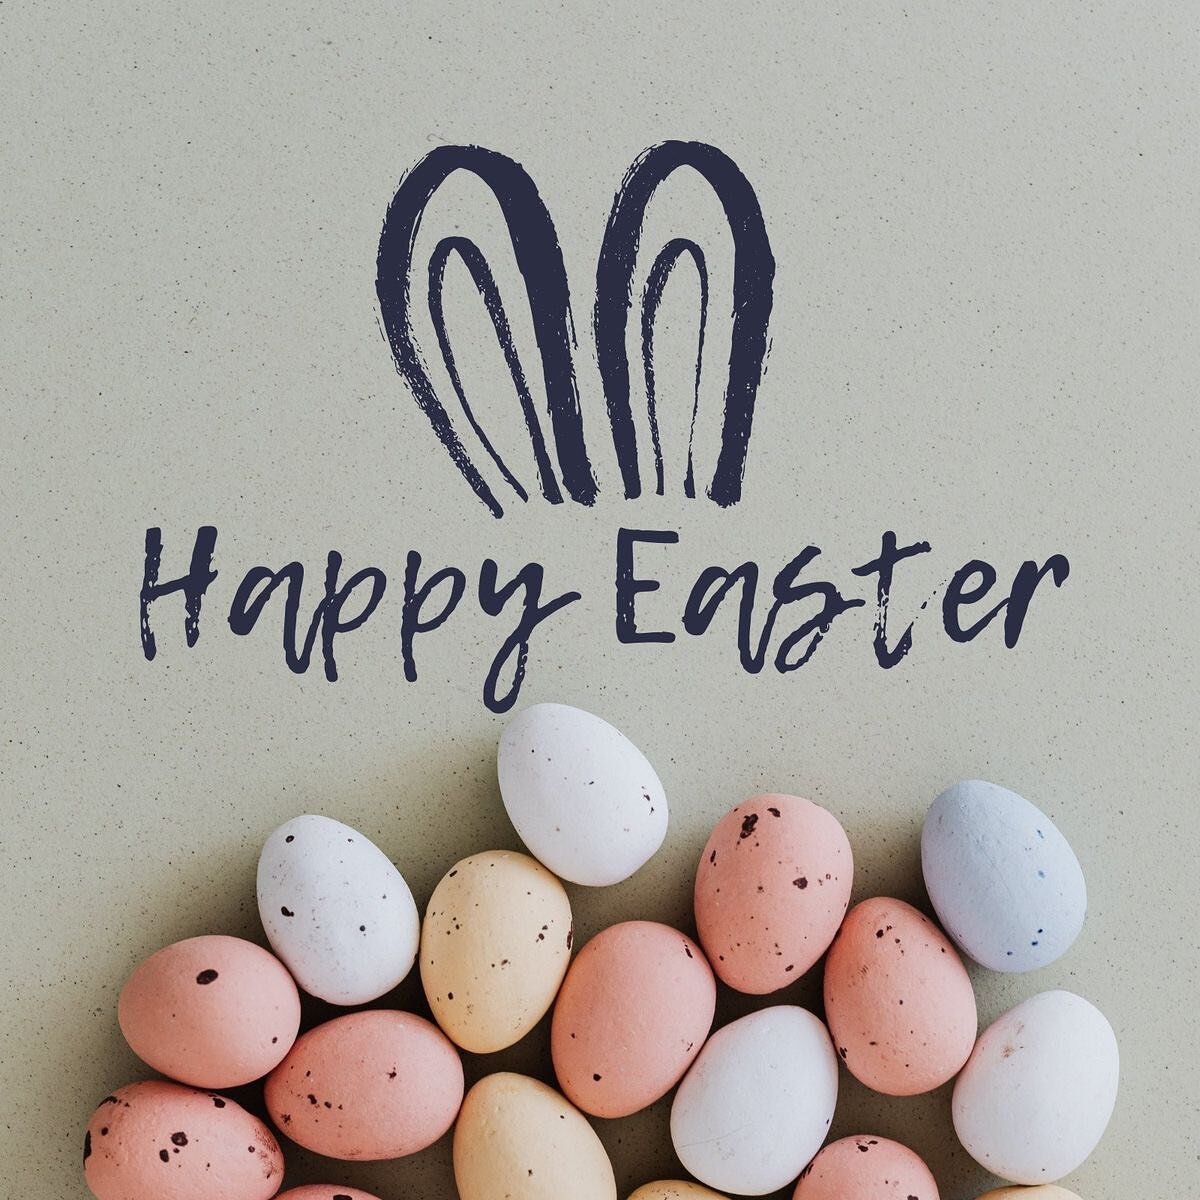 Hoppy Easter from the team at Dr. Chenails! 🐰🤍

We hope this season brings happiness and joy to you and your loved ones.🐣